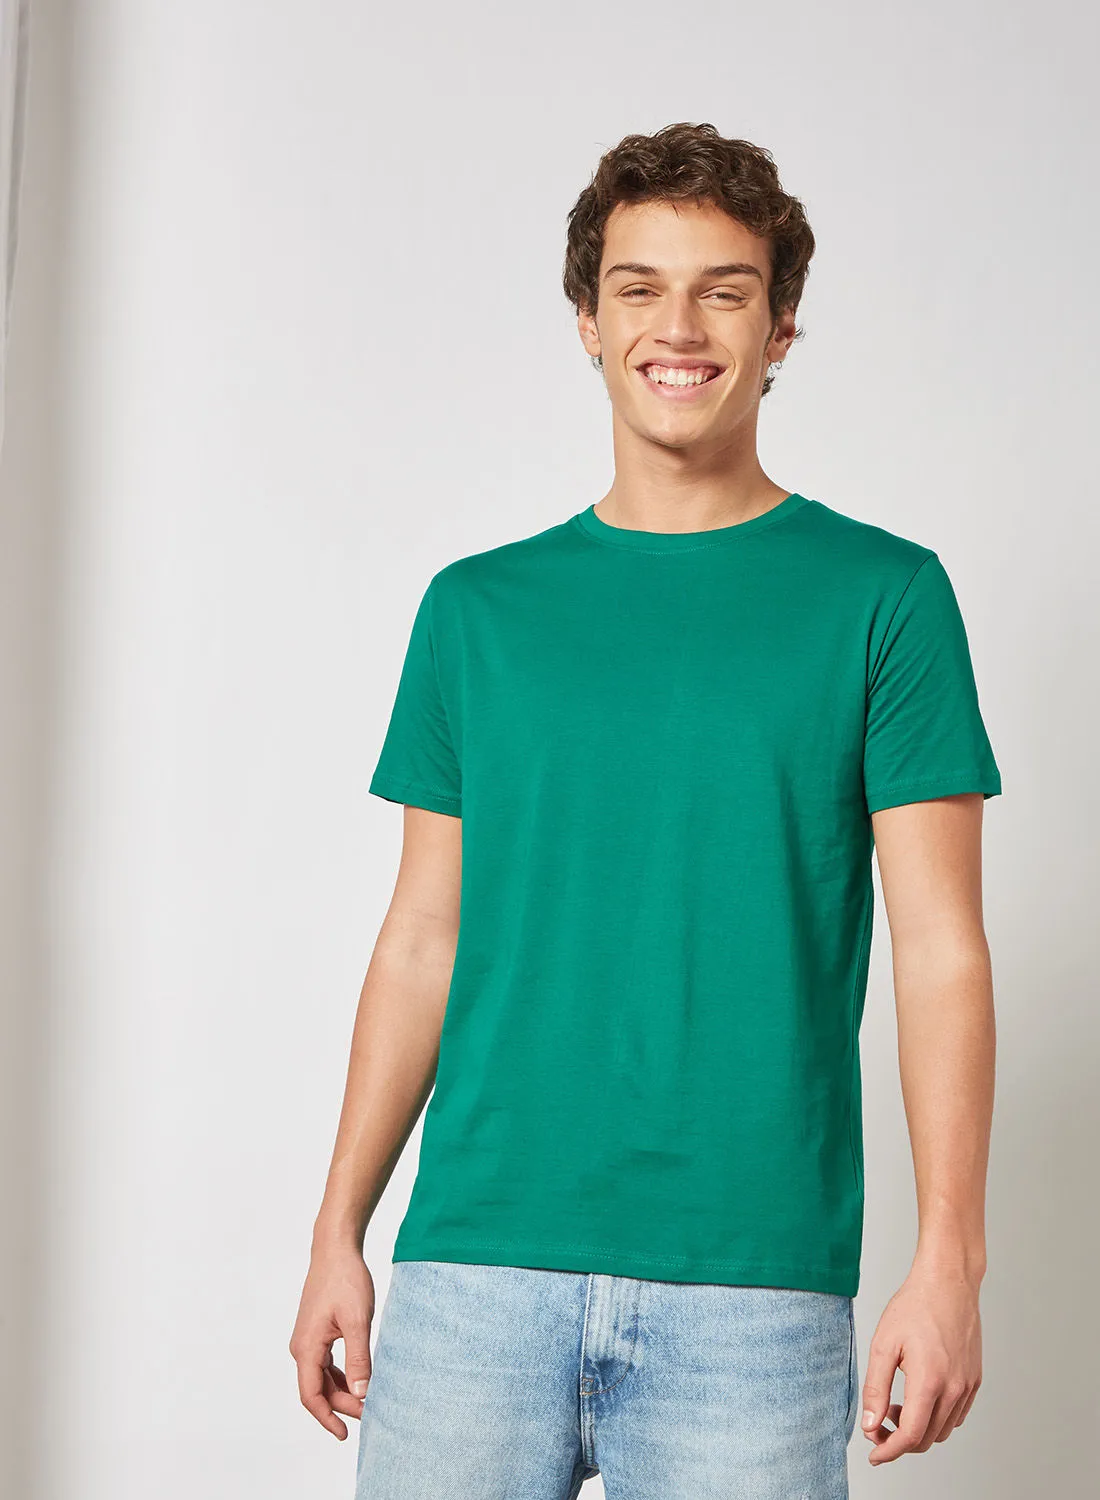 STATE 8 Crew Neck T-Shirt Green